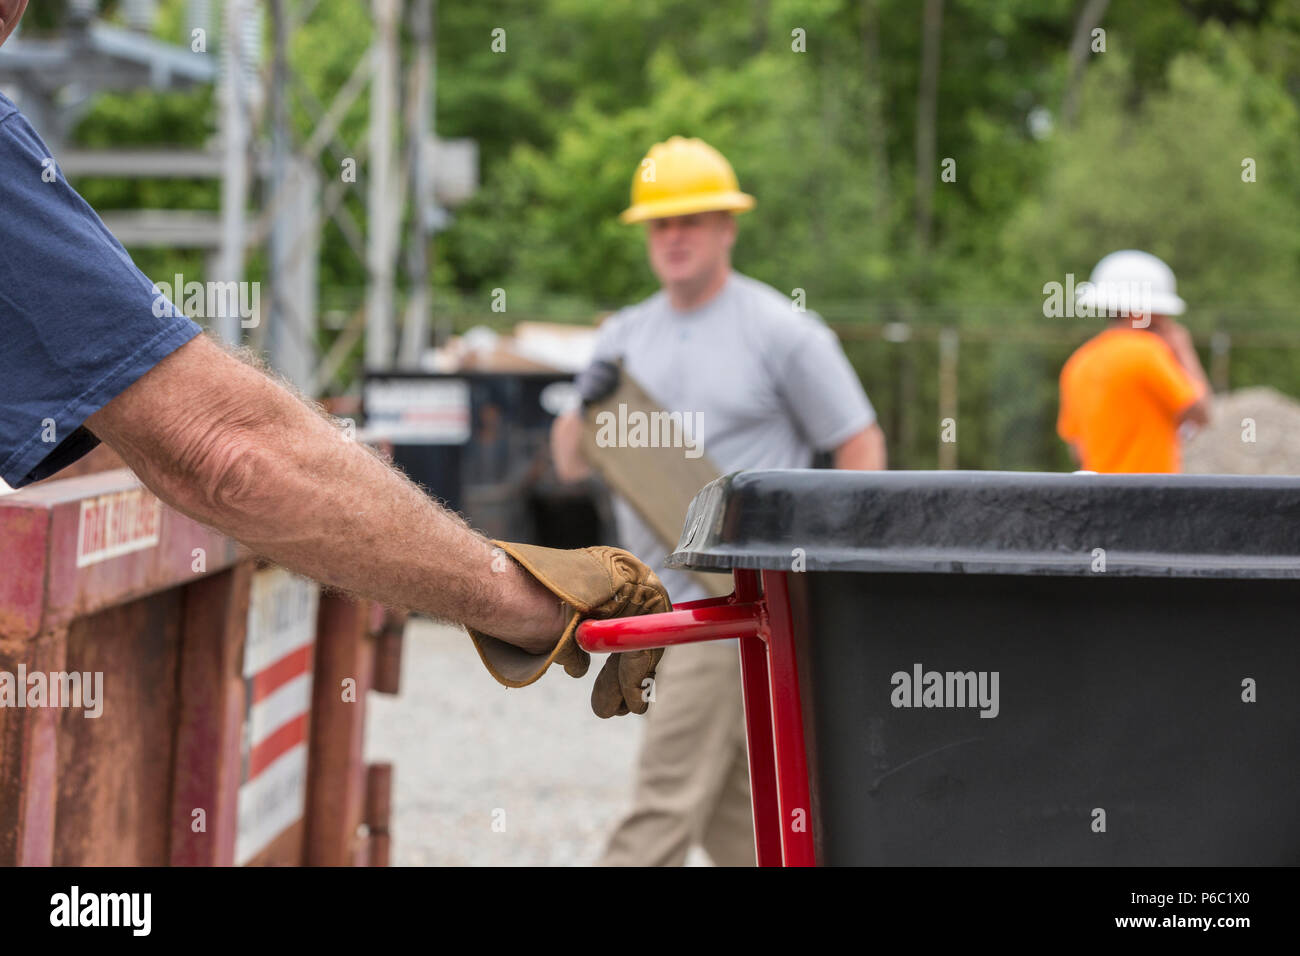 Engineers putting refuse into a dumpster Stock Photo